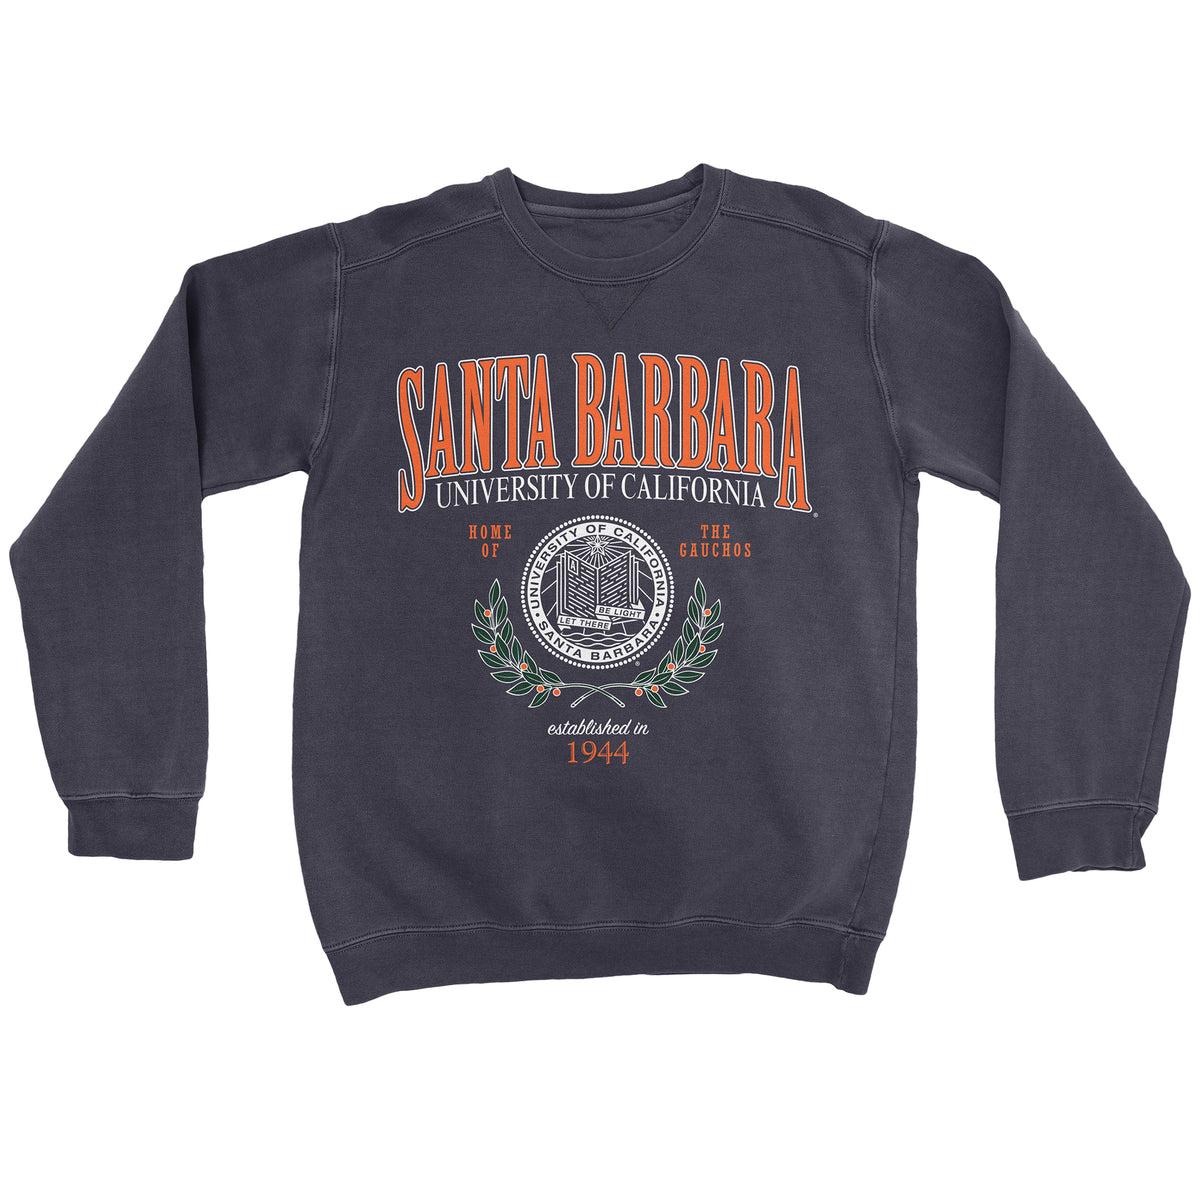 UCSB Crewnecks - Island View Outfitters